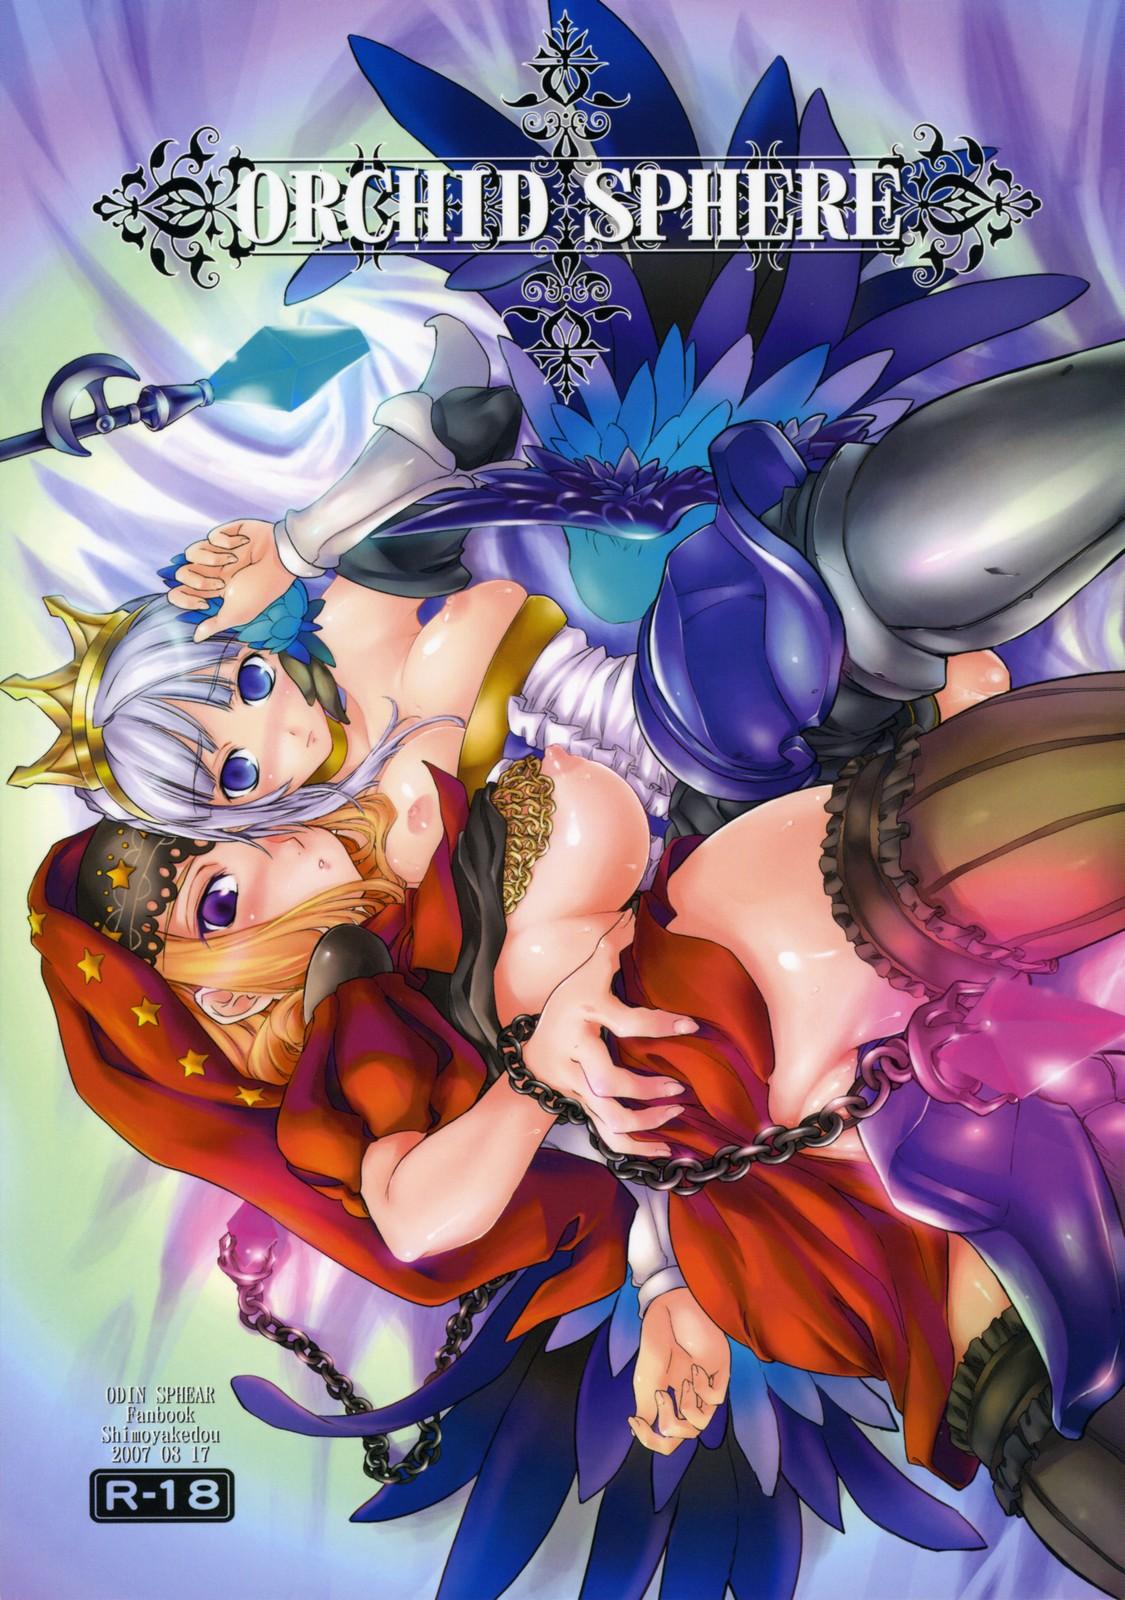 Dad Orchid Sphere - Odin sphere Sologirl - Picture 1